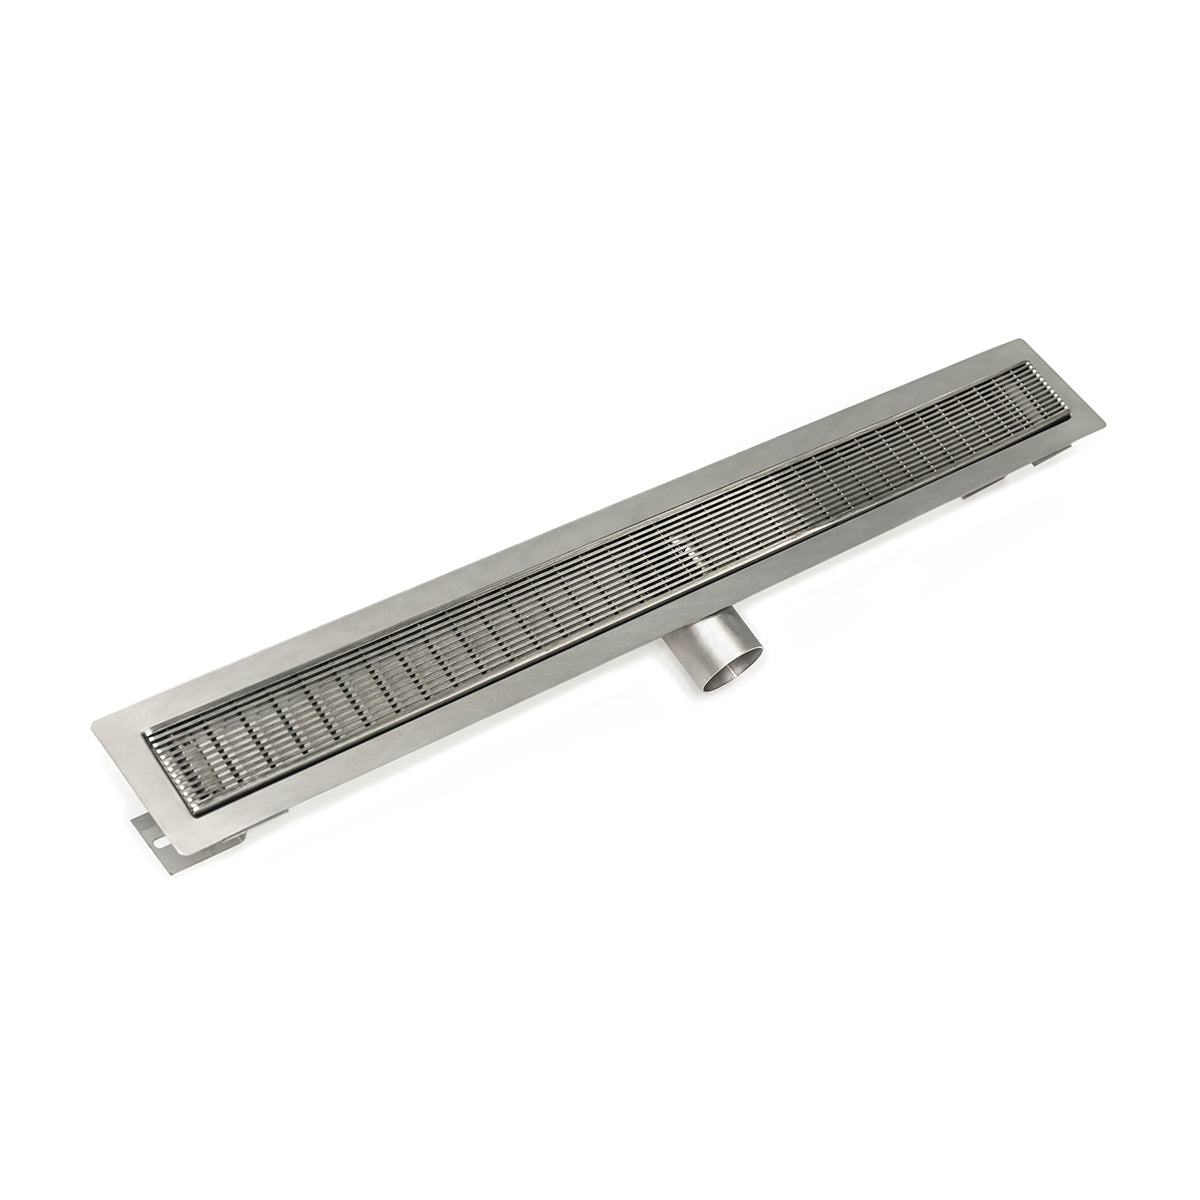 Infinity Drain 36" FT Series Side Outlet Linear Drain Kit with 2 1/2" Wedge Wire Grate